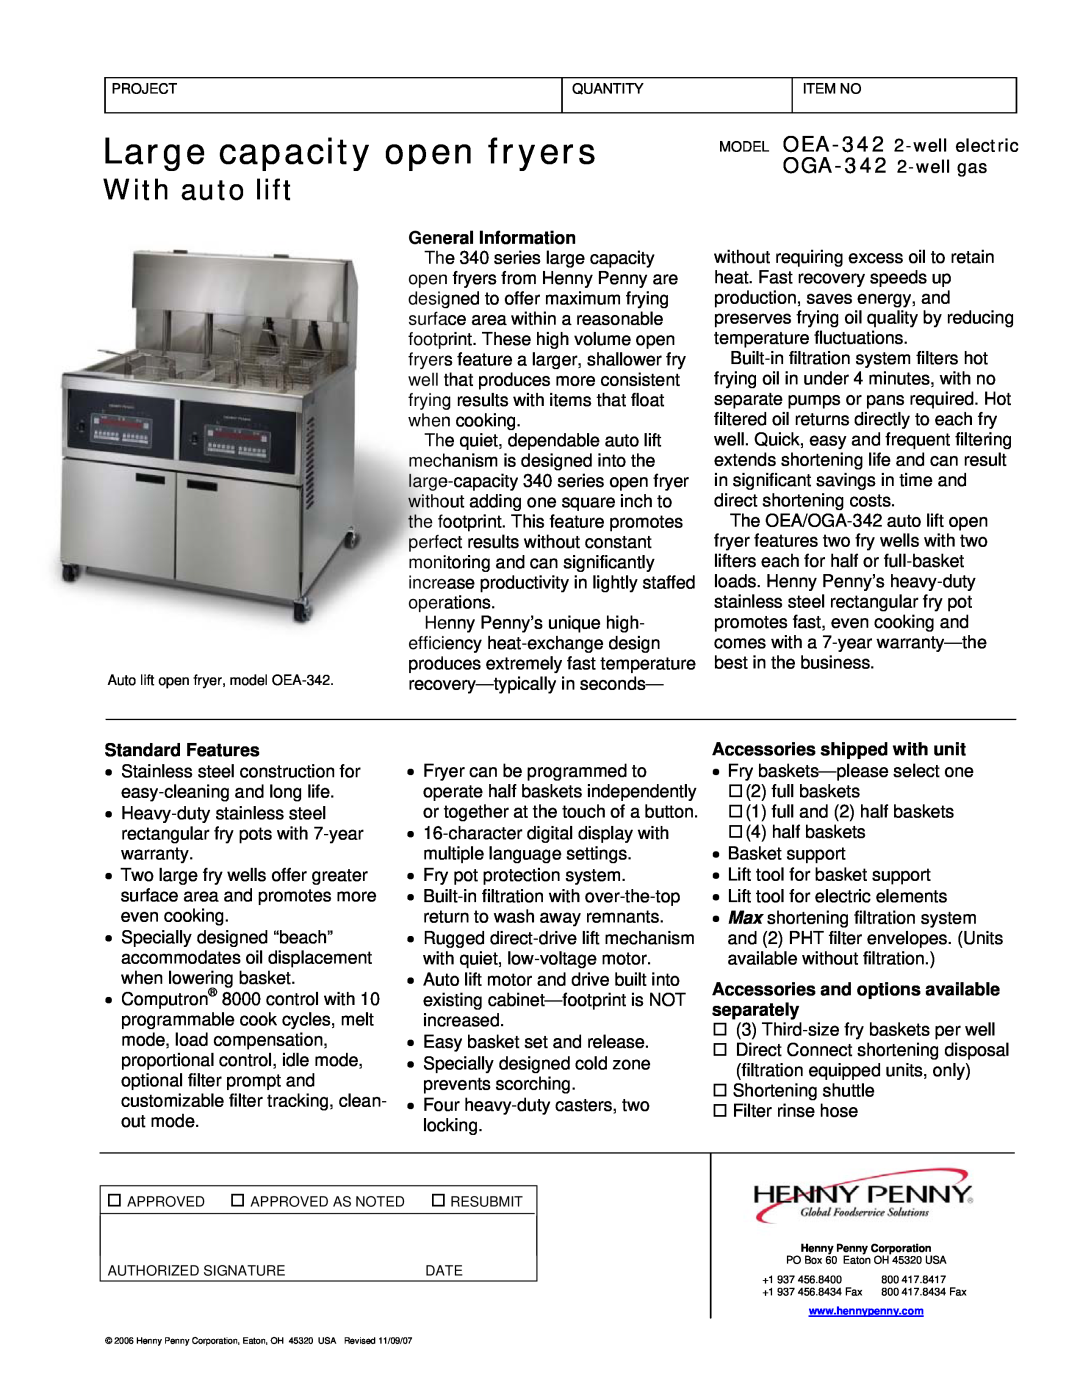 Henny Penny OEA-342, OGA-342 warranty Large capacity open fryers, With auto lift, General Information, Standard Features 